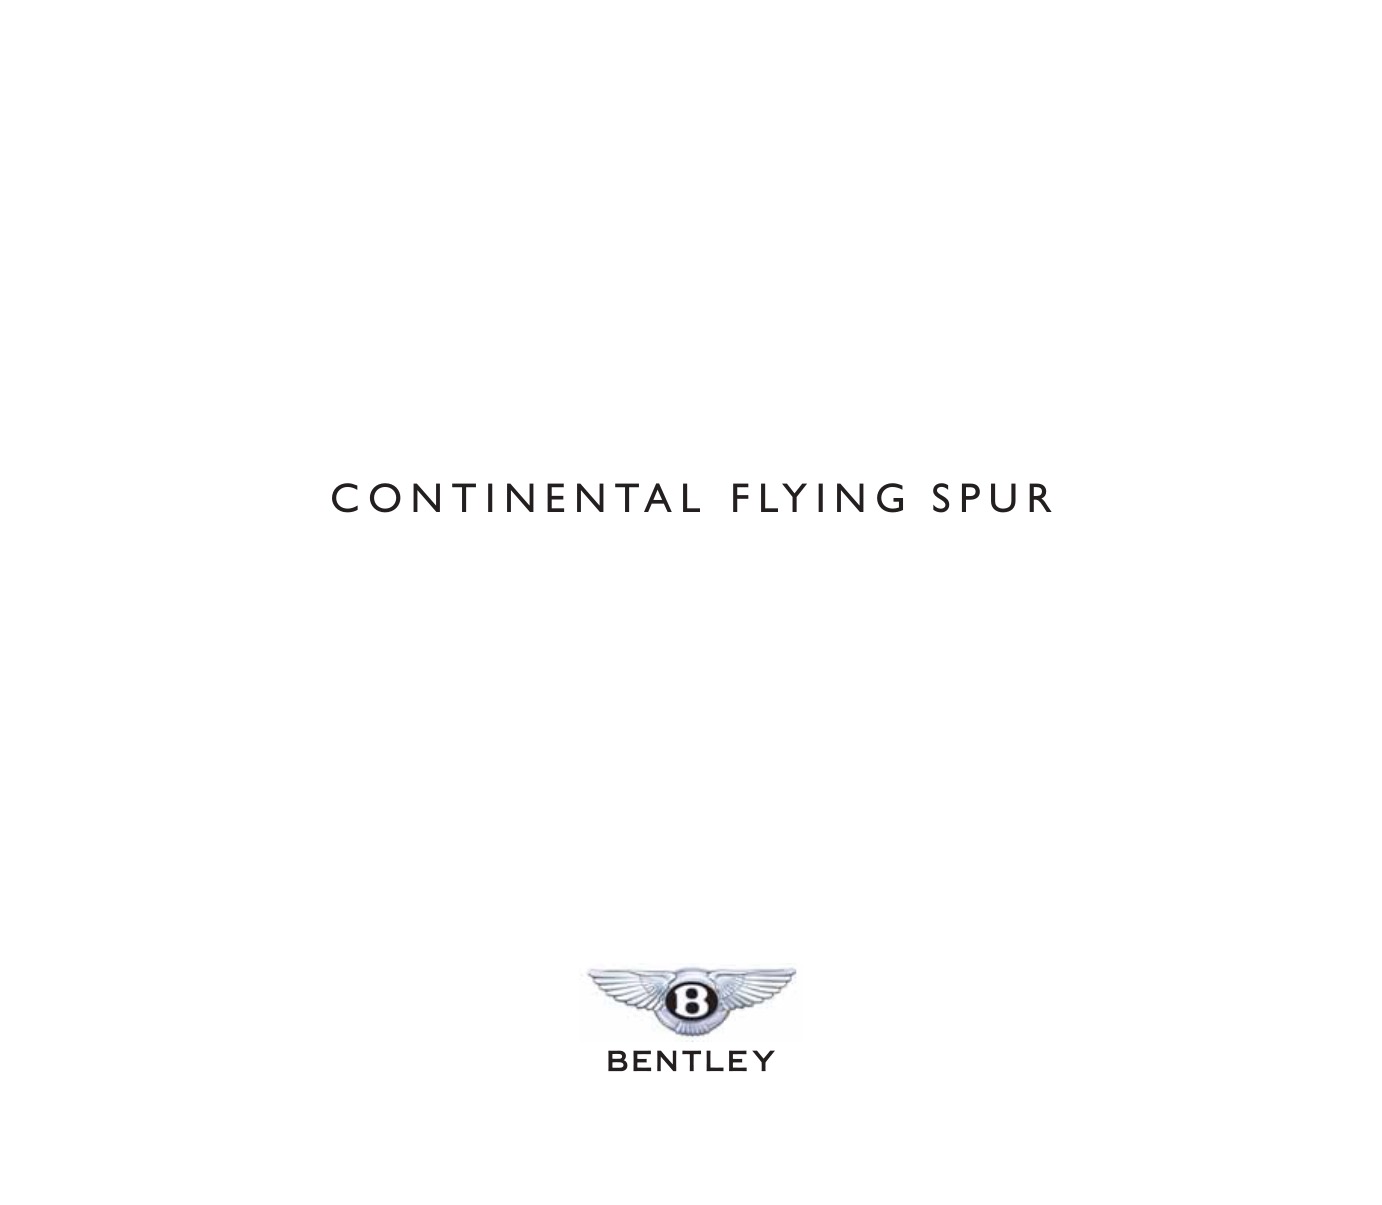 2009 Bentley Continental Flying Spur Brochure Page 10